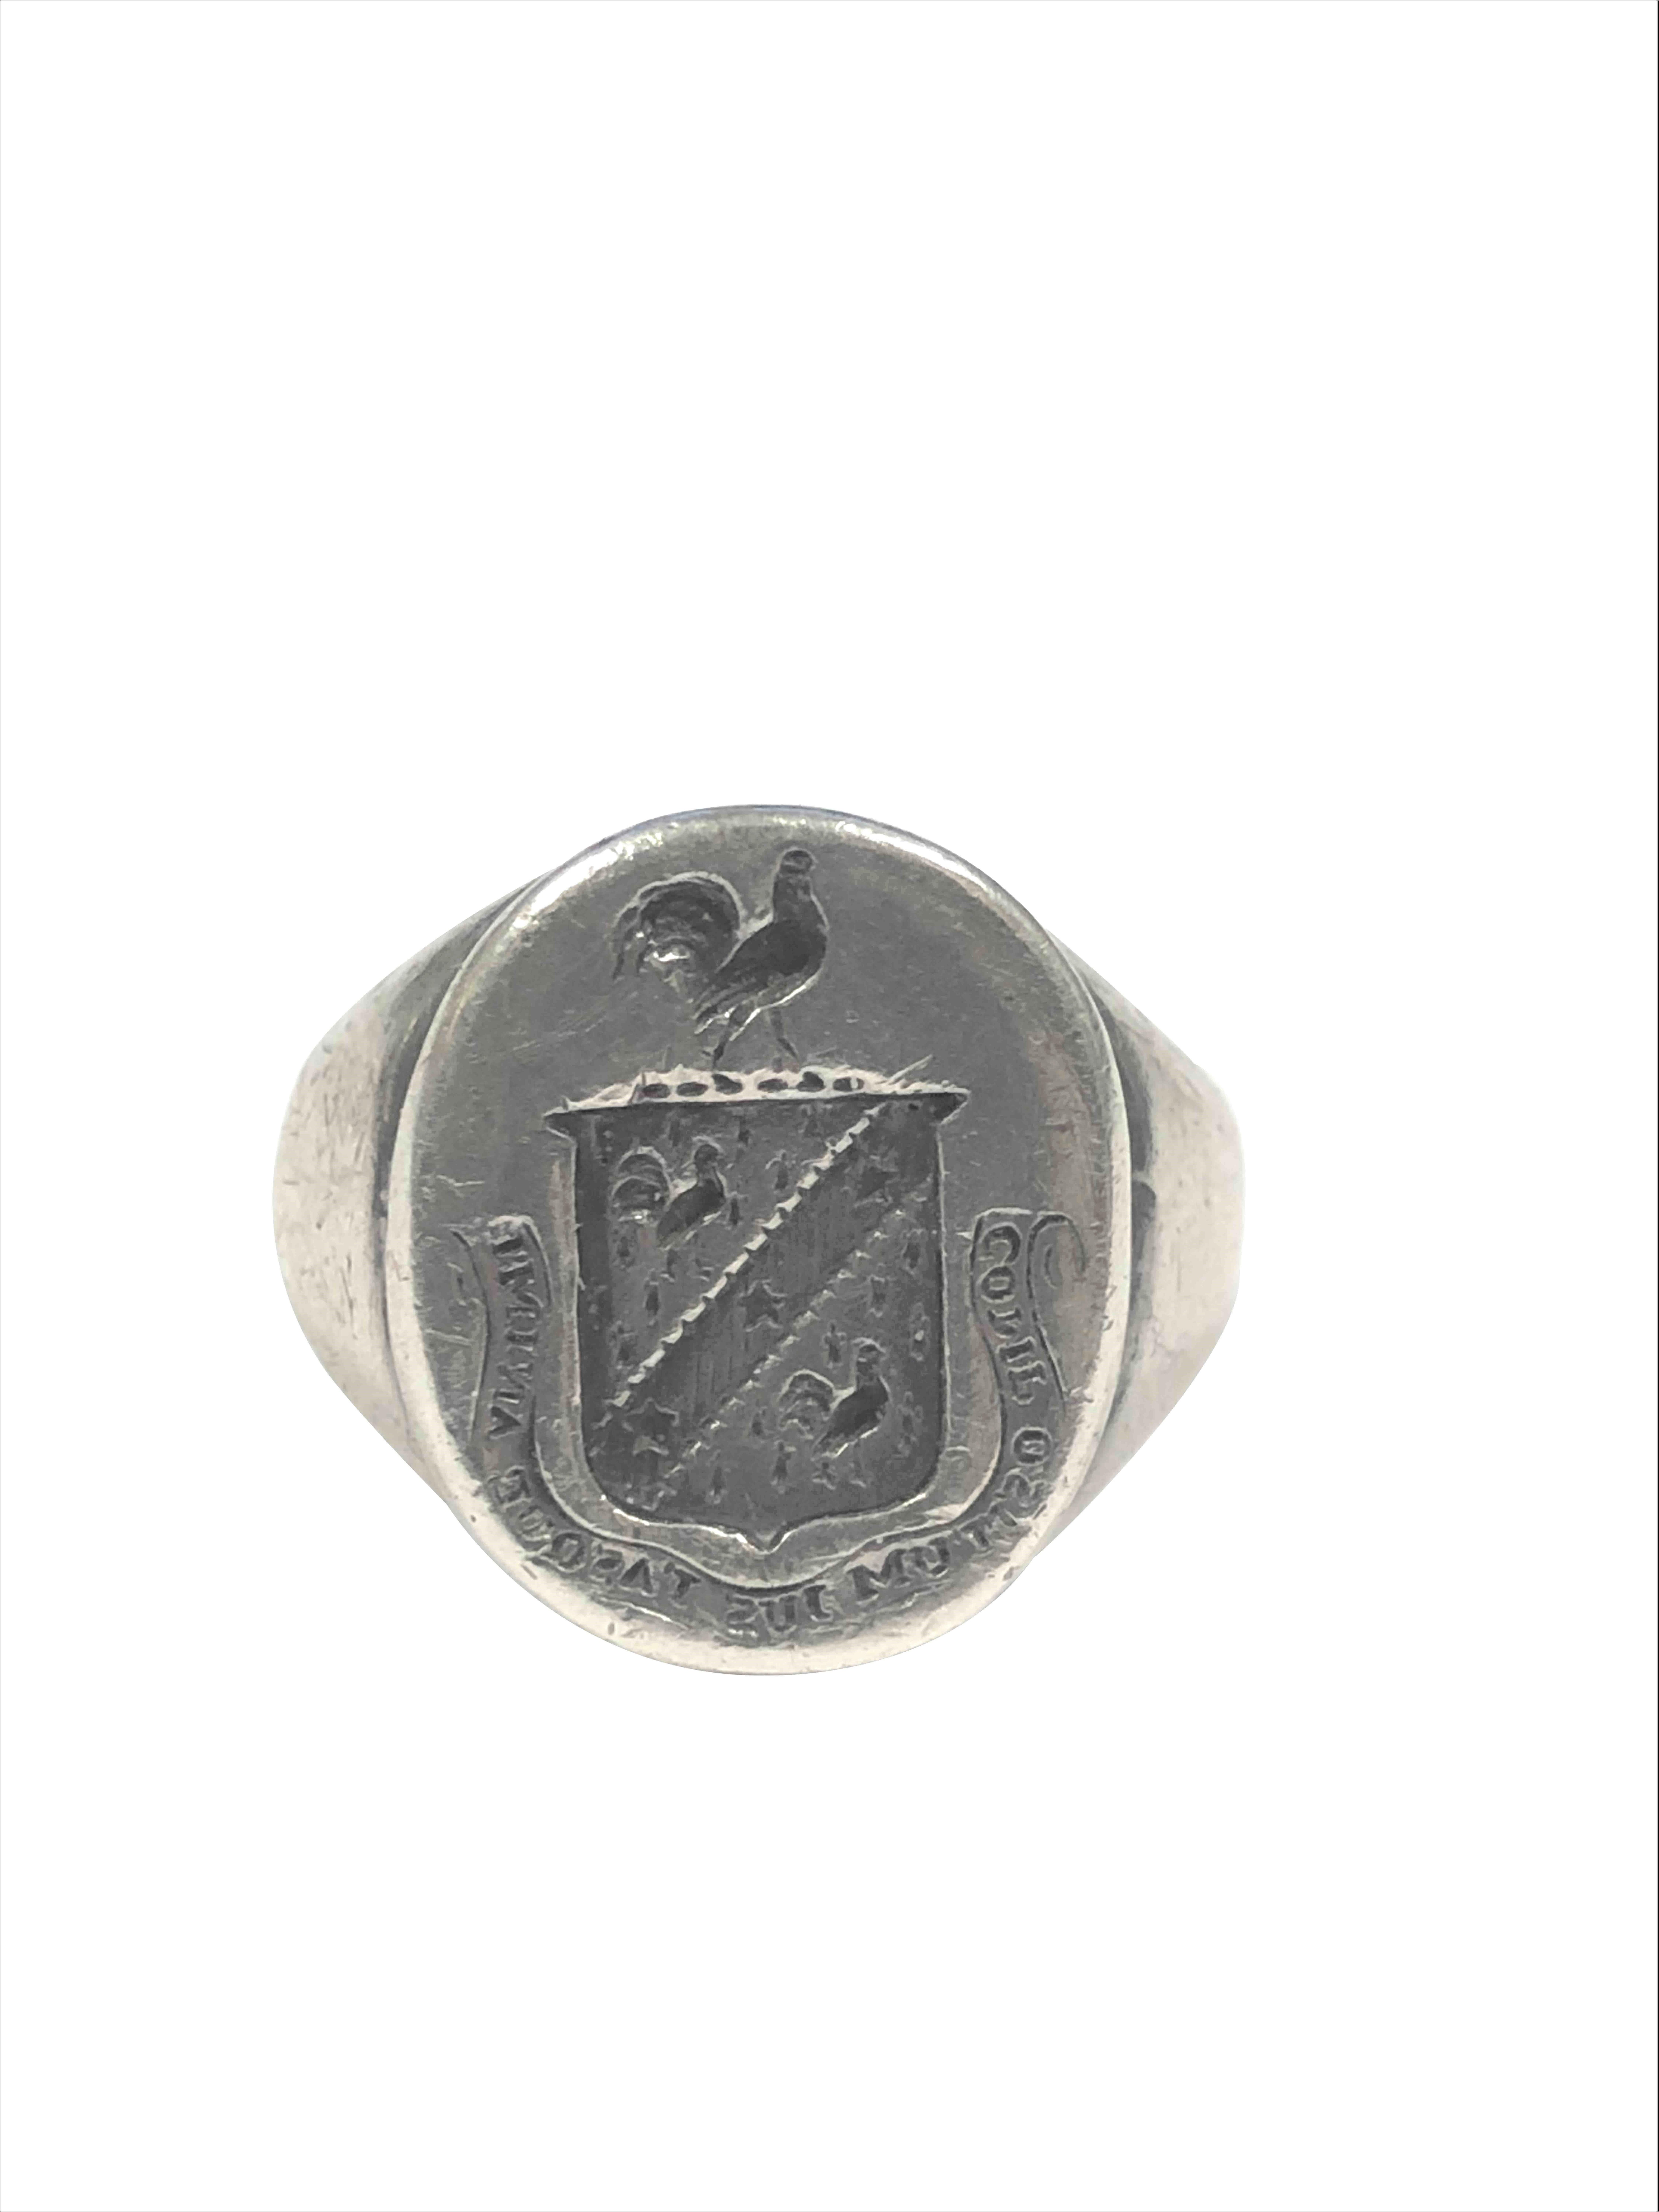 Circa 1950s Sterling Silver Signet Ring, owned and worn by George Hamilton, The top of the ring measuring  5/8 X 1/2 inch and having a Deep carved Crest. Finger size 6 1/2. Come with all Proper Provenance.  